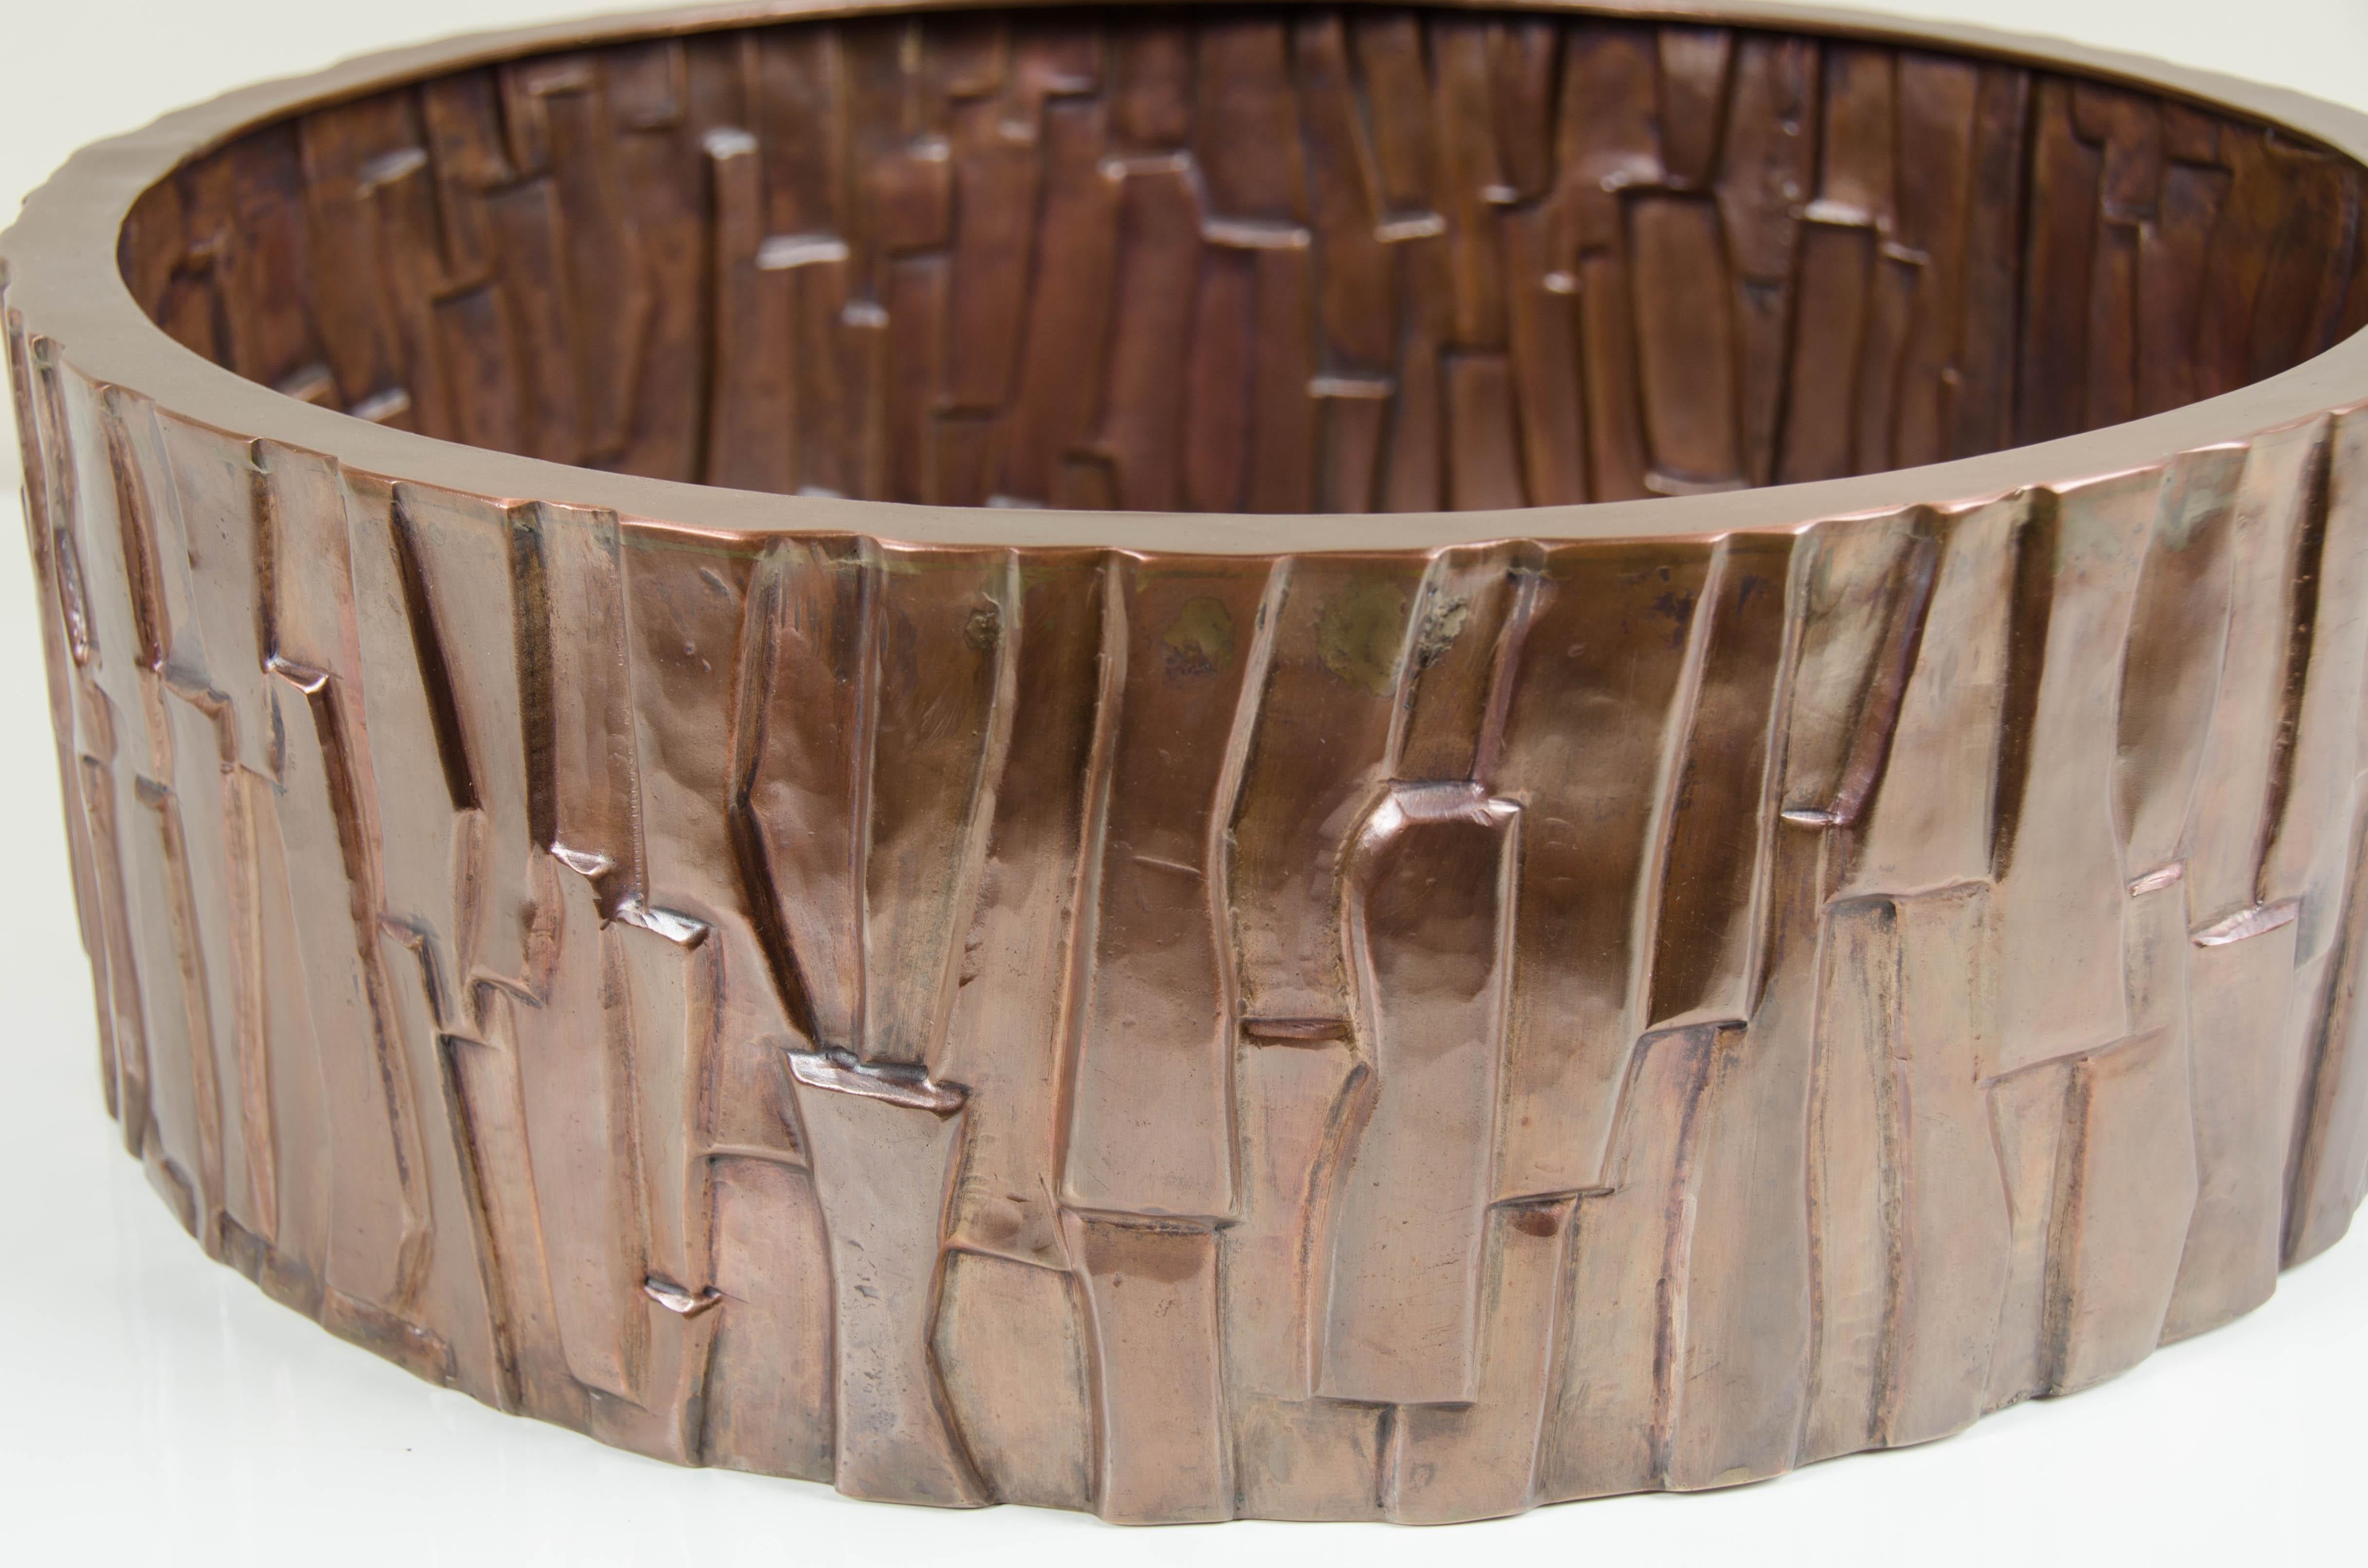 Contemporary Kuai Design Low Cachepot, Copper by Robert Kuo, Hand Repoussé, Limited Edition For Sale